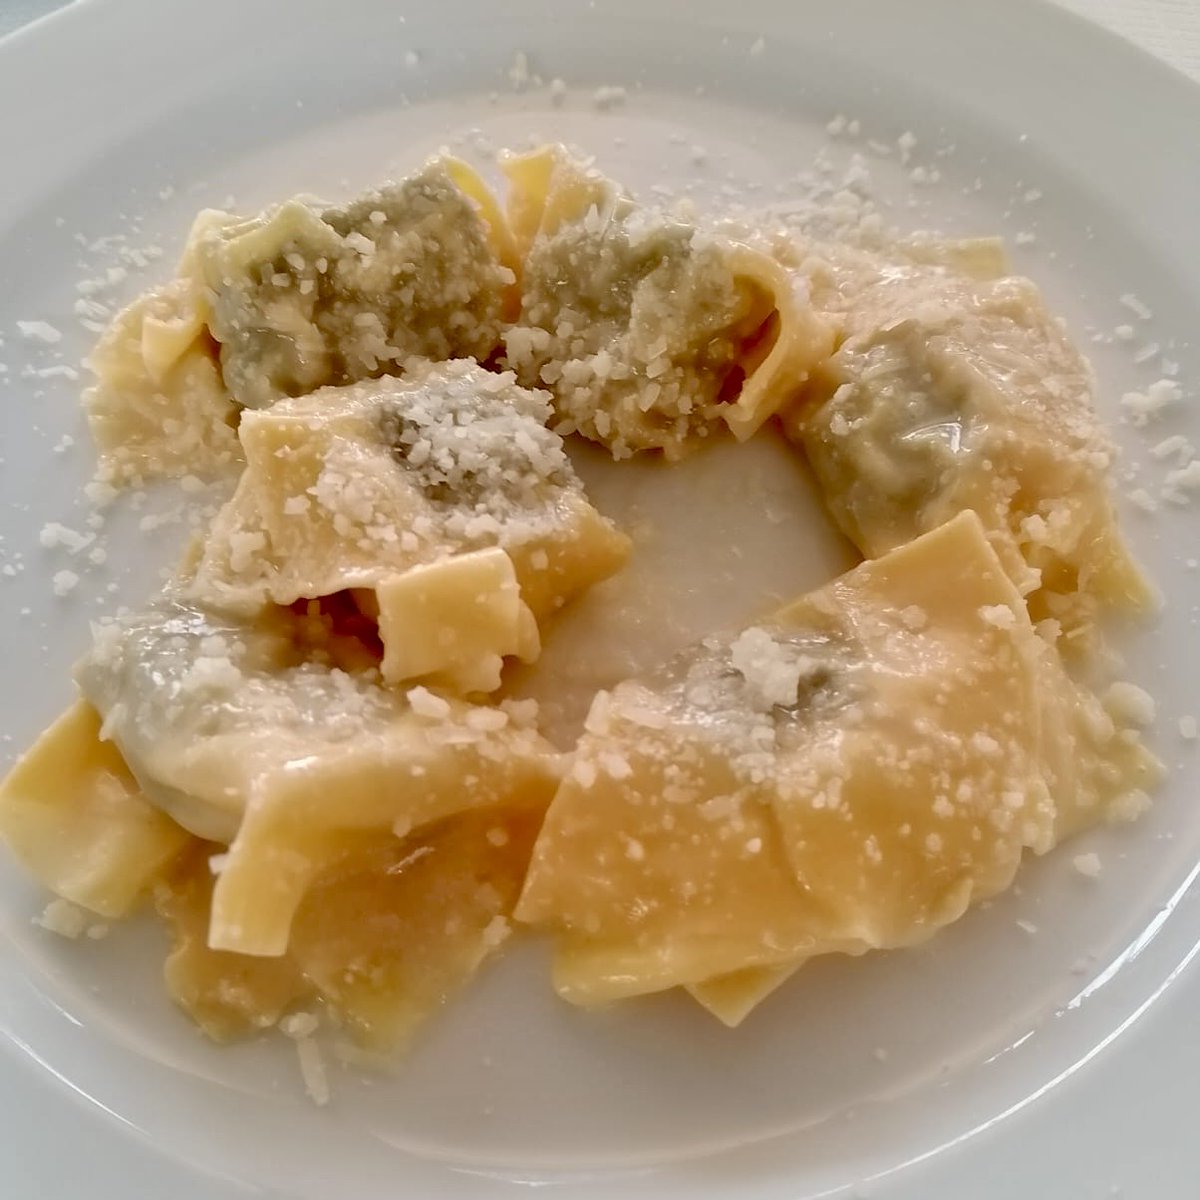 ”@RiverCafeLondon - A timeless #Italian classic that's all about taking the best seasonal produce and turning it into heaven. It should be on every foodie's bucket list. 3 #AARosettes retained!” - AA Inspector Join an AA scheme today! > tinyurl.com/4udrtp49